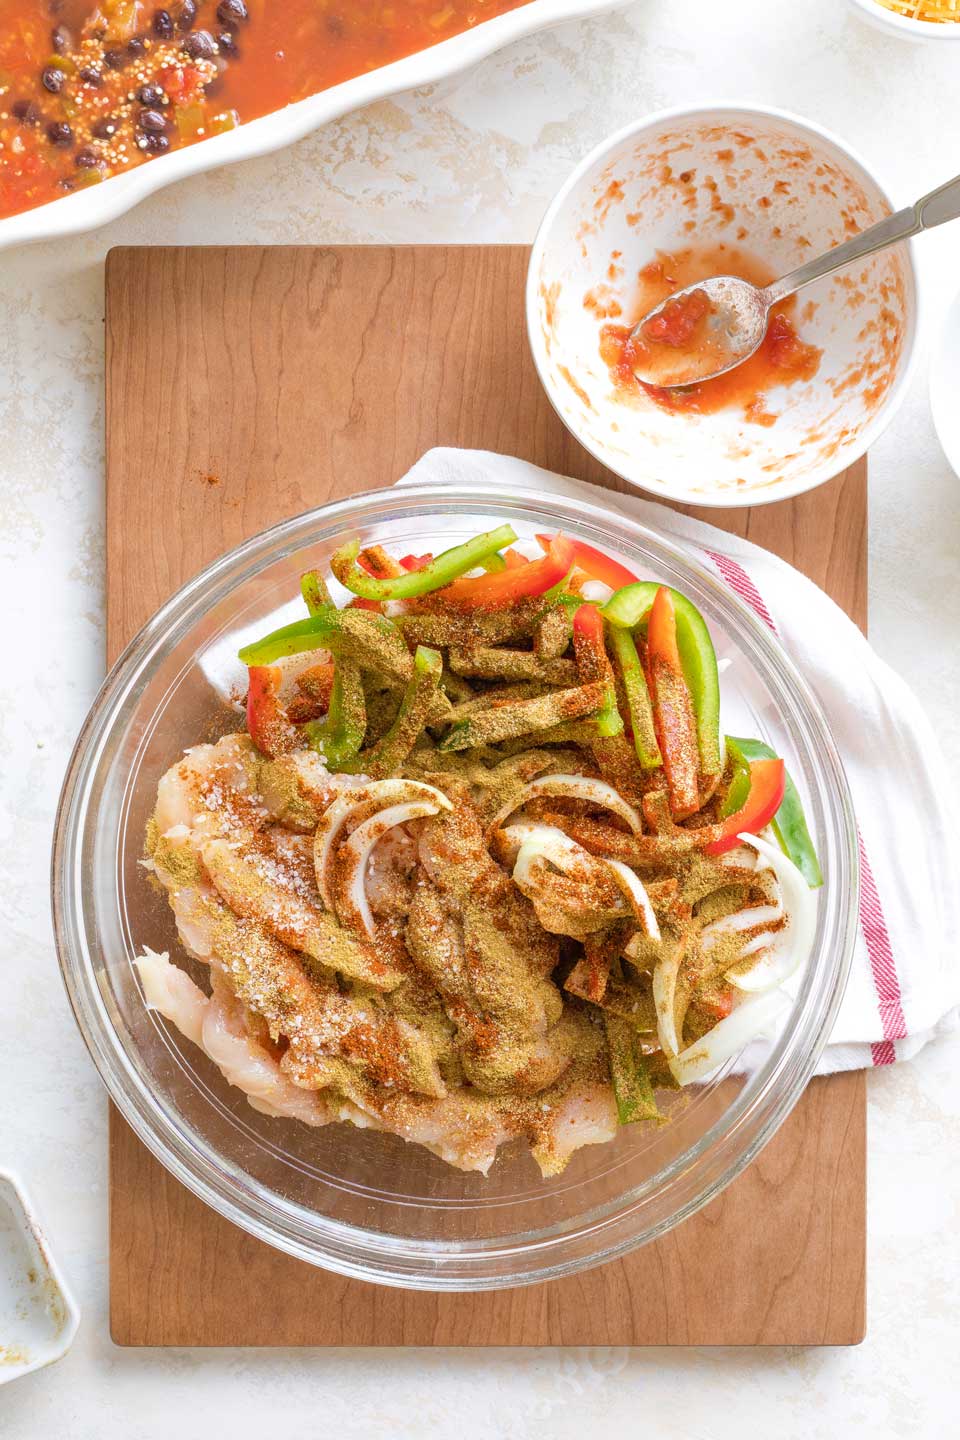 Overhead of fajita strips of chicken and vegetables in glass bowl, sprinkled with Mexican spices; casserole dish behind.